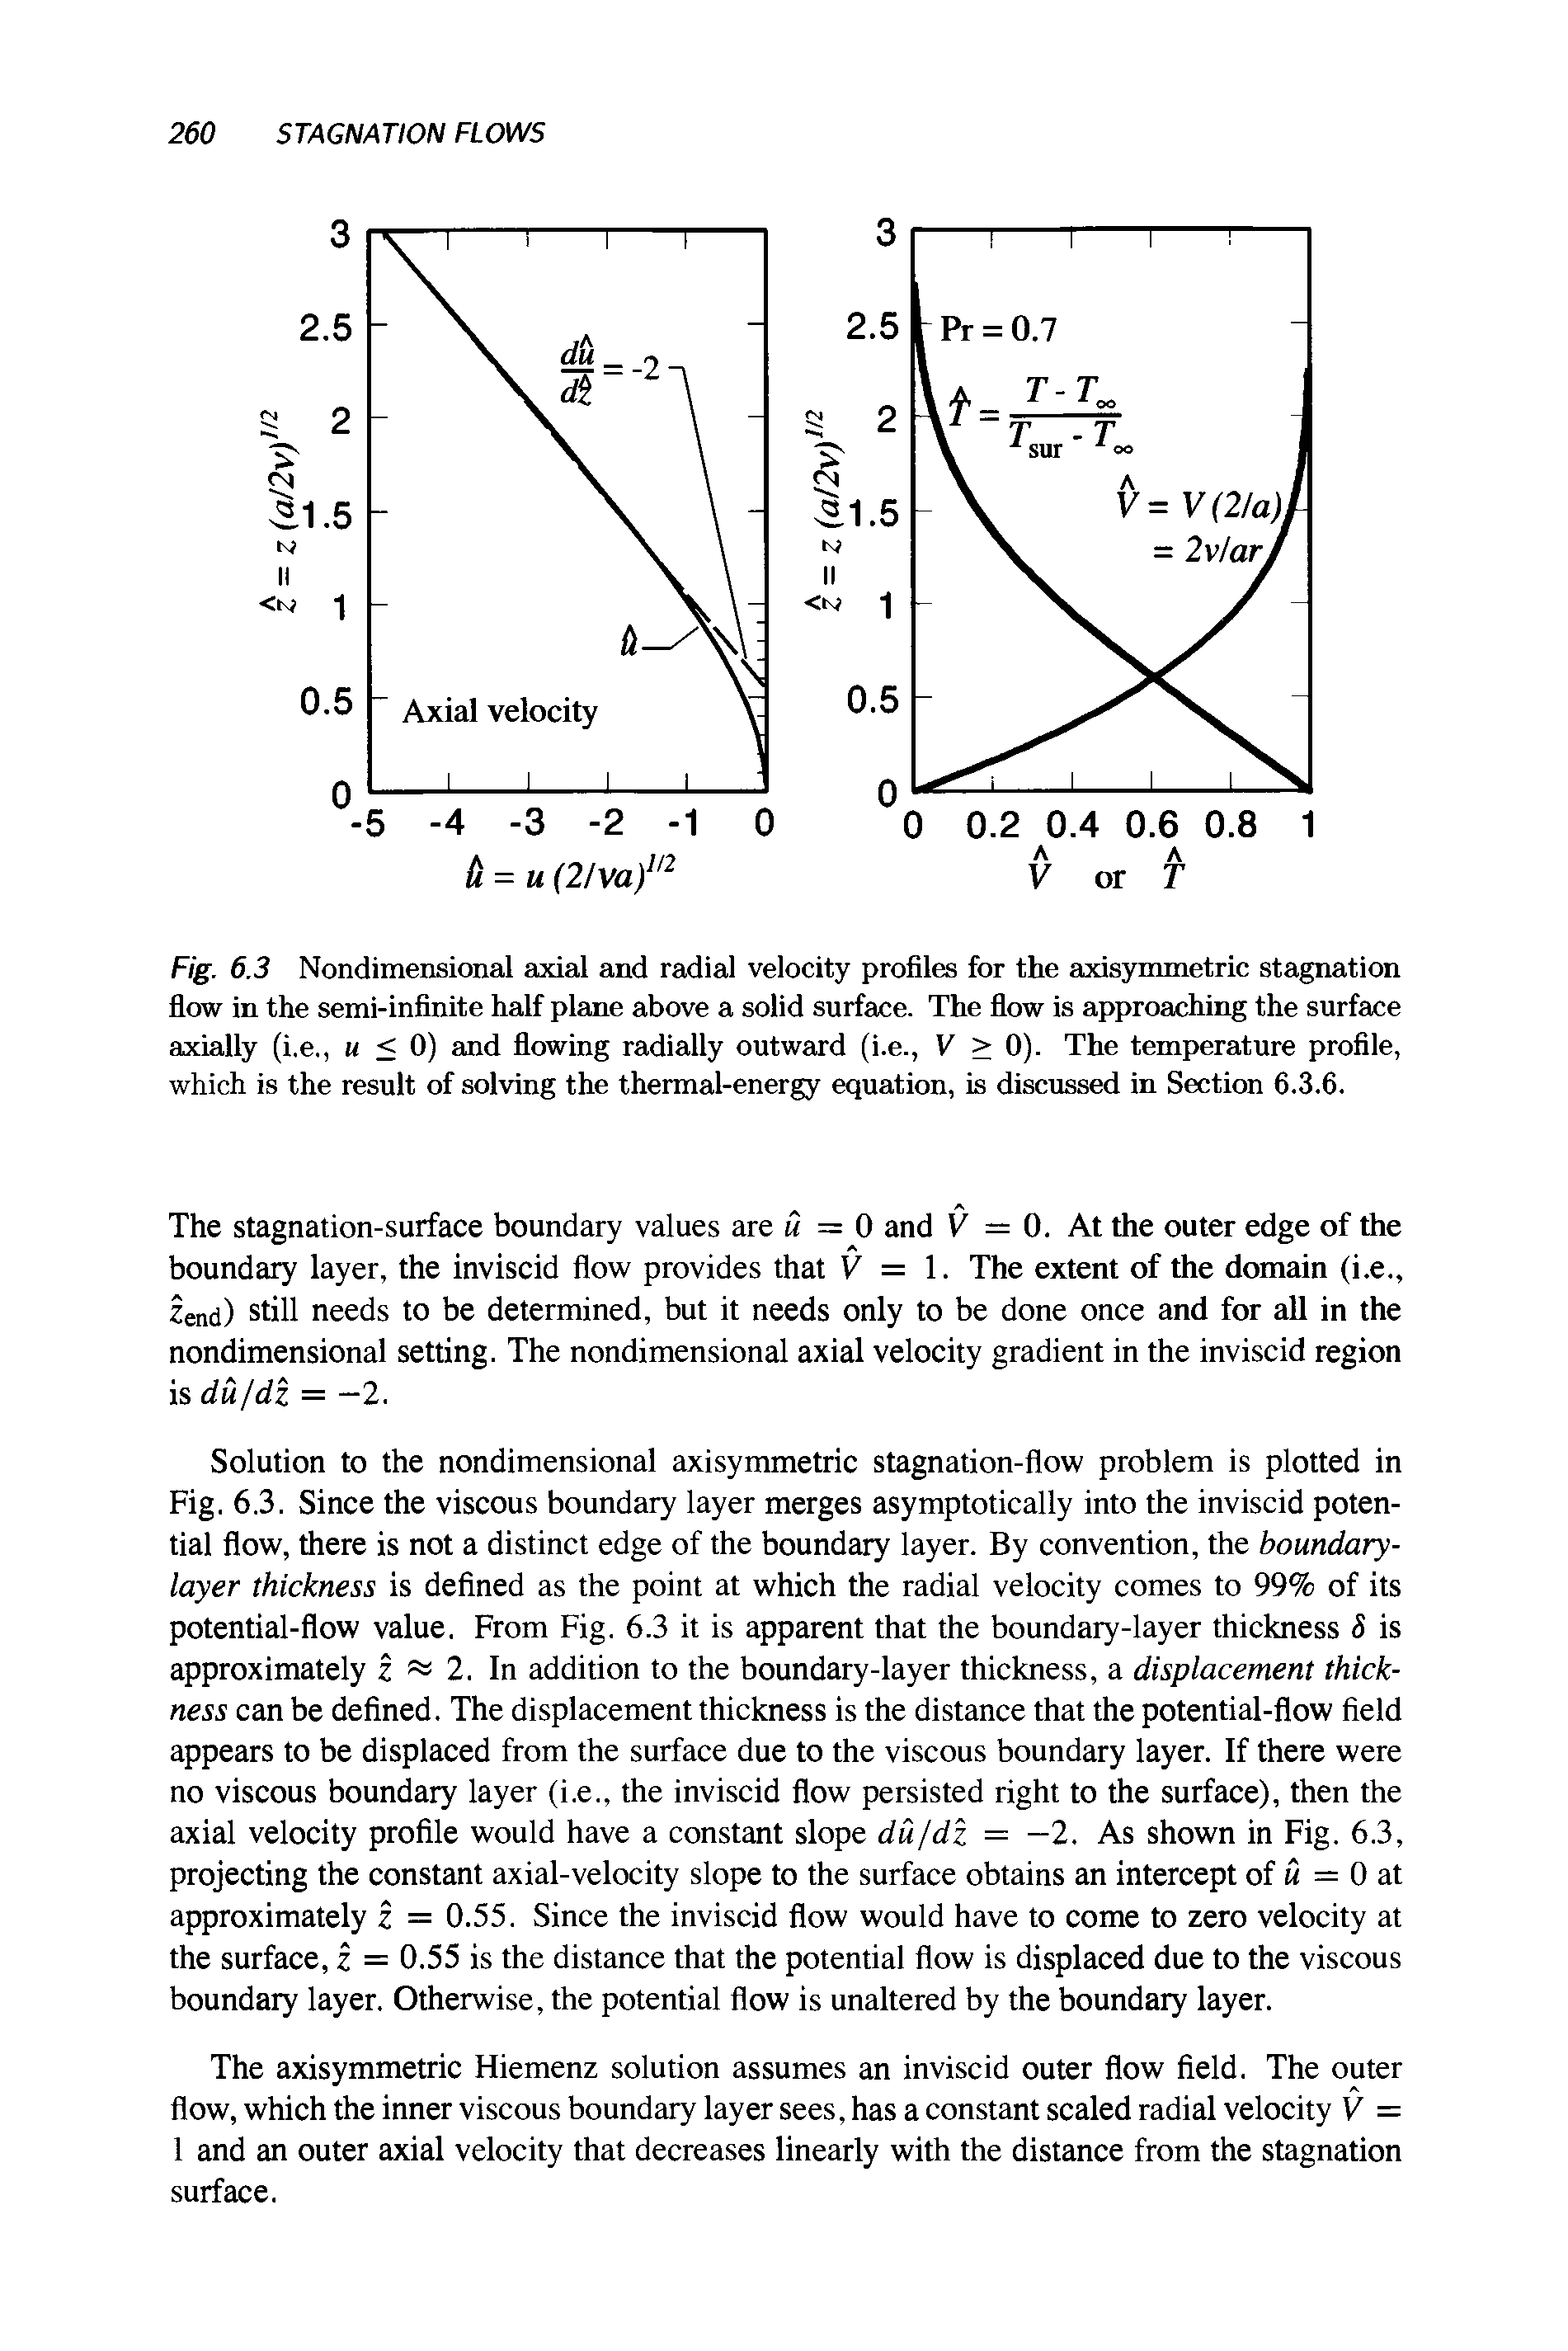 Fig. 6.3 Nondimensional axial and radial velocity profiles for the axisymmetric stagnation flow in the semi-infinite half plane above a solid surface. The flow is approaching the surface axially (i.e., u < 0) and flowing radially outward (i.e., V > 0). The temperature profile, which is the result of solving the thermal-energy equation, is discussed in Section 6.3.6.